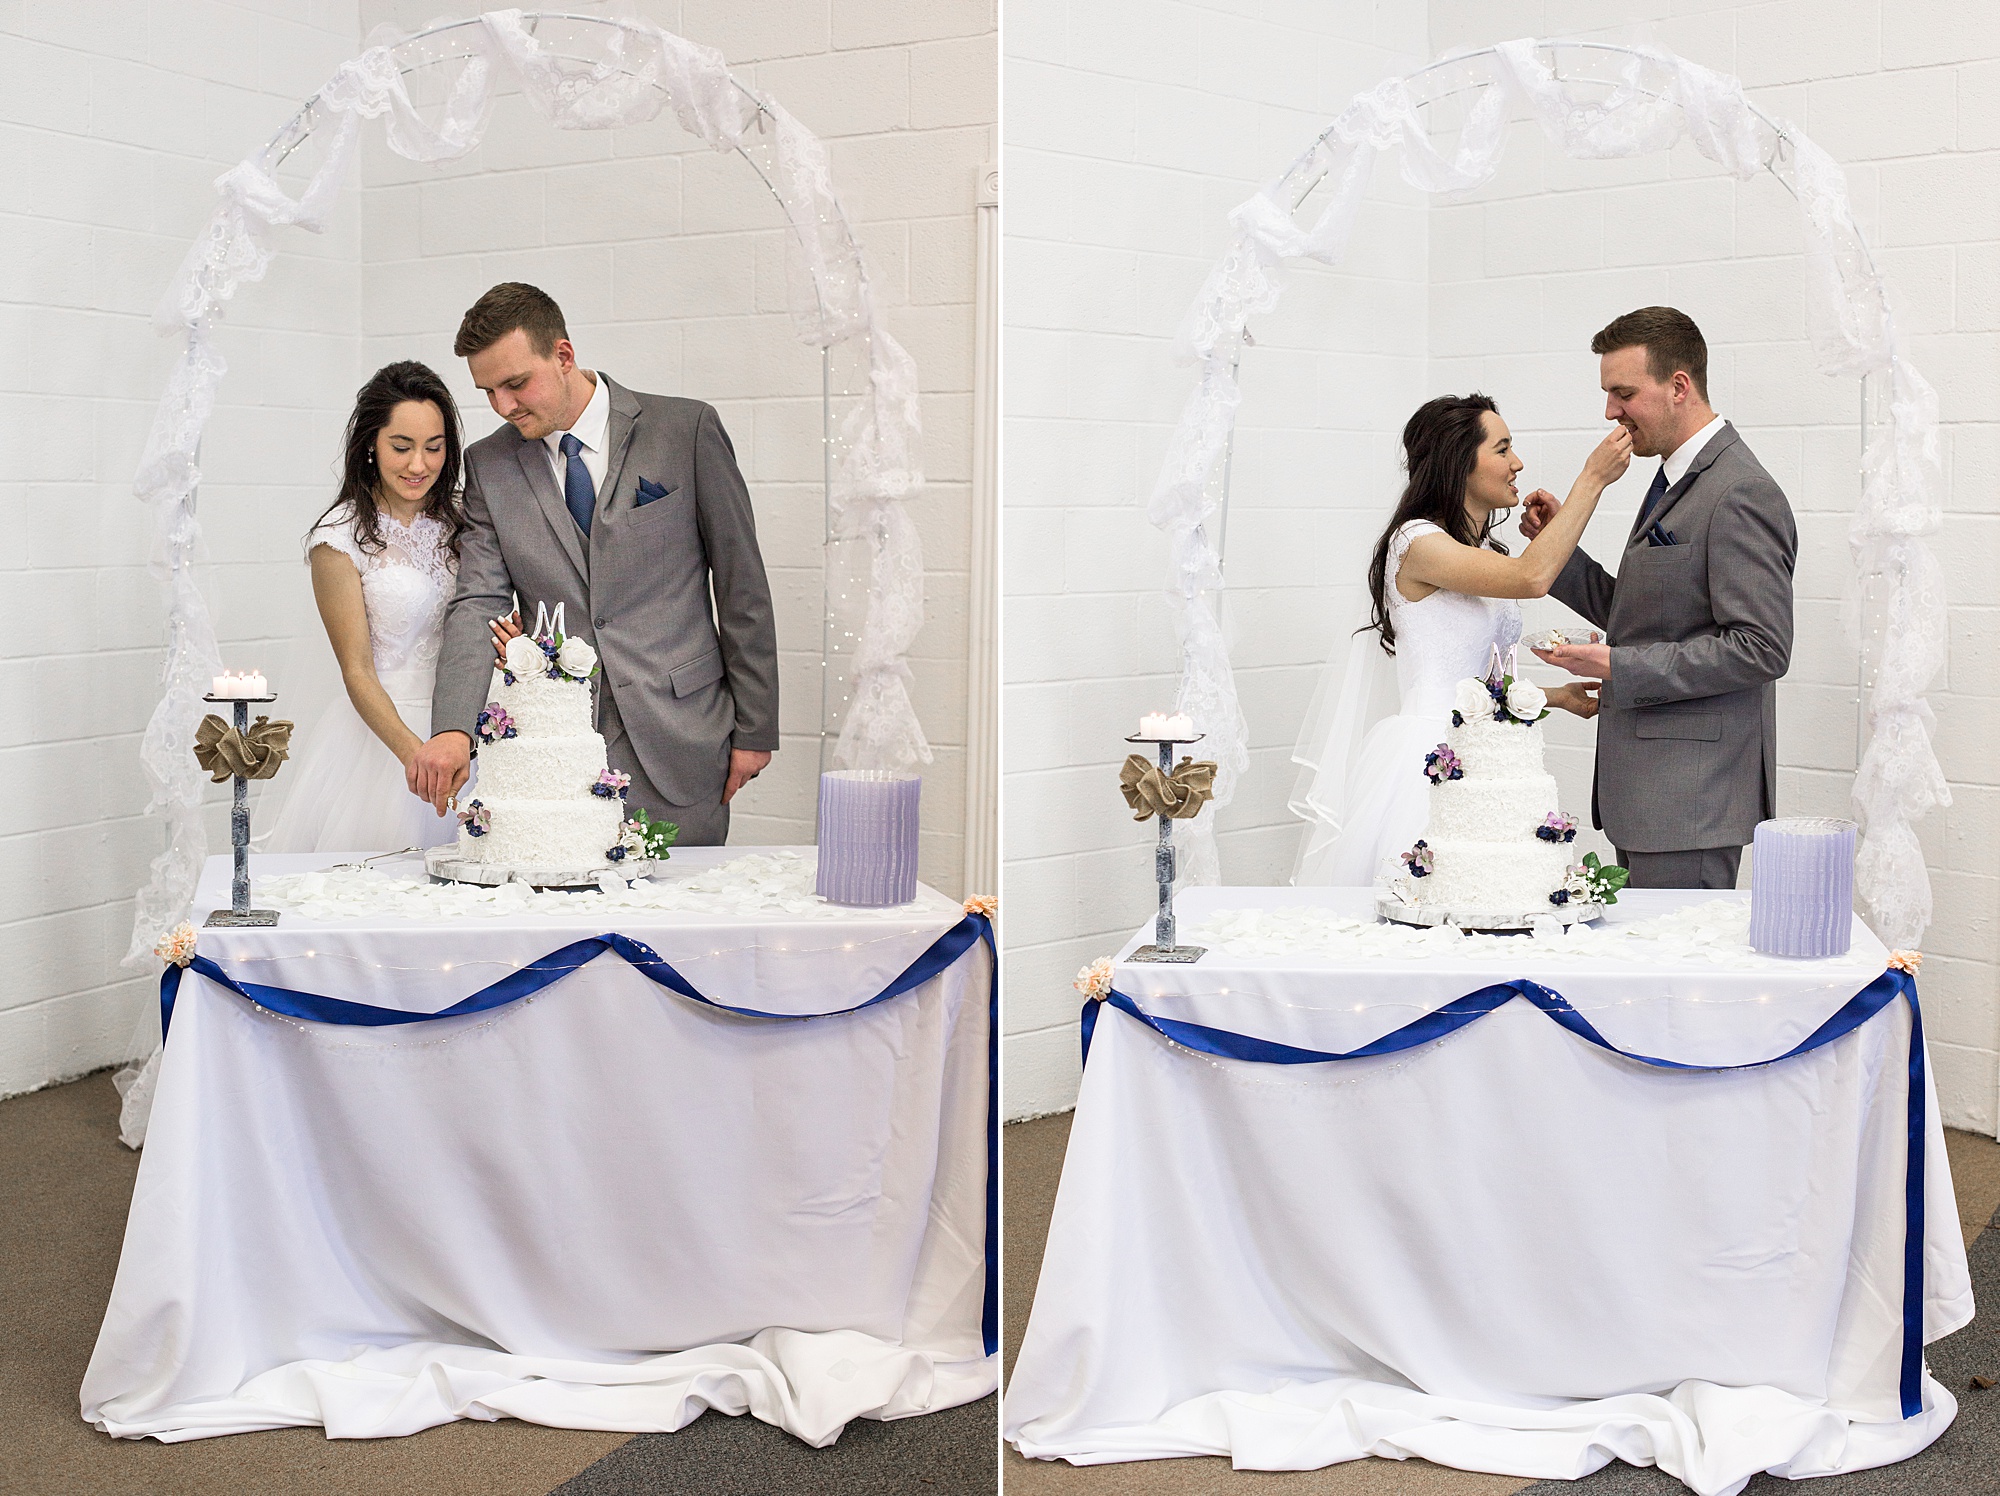 couple cuts wedding cake together